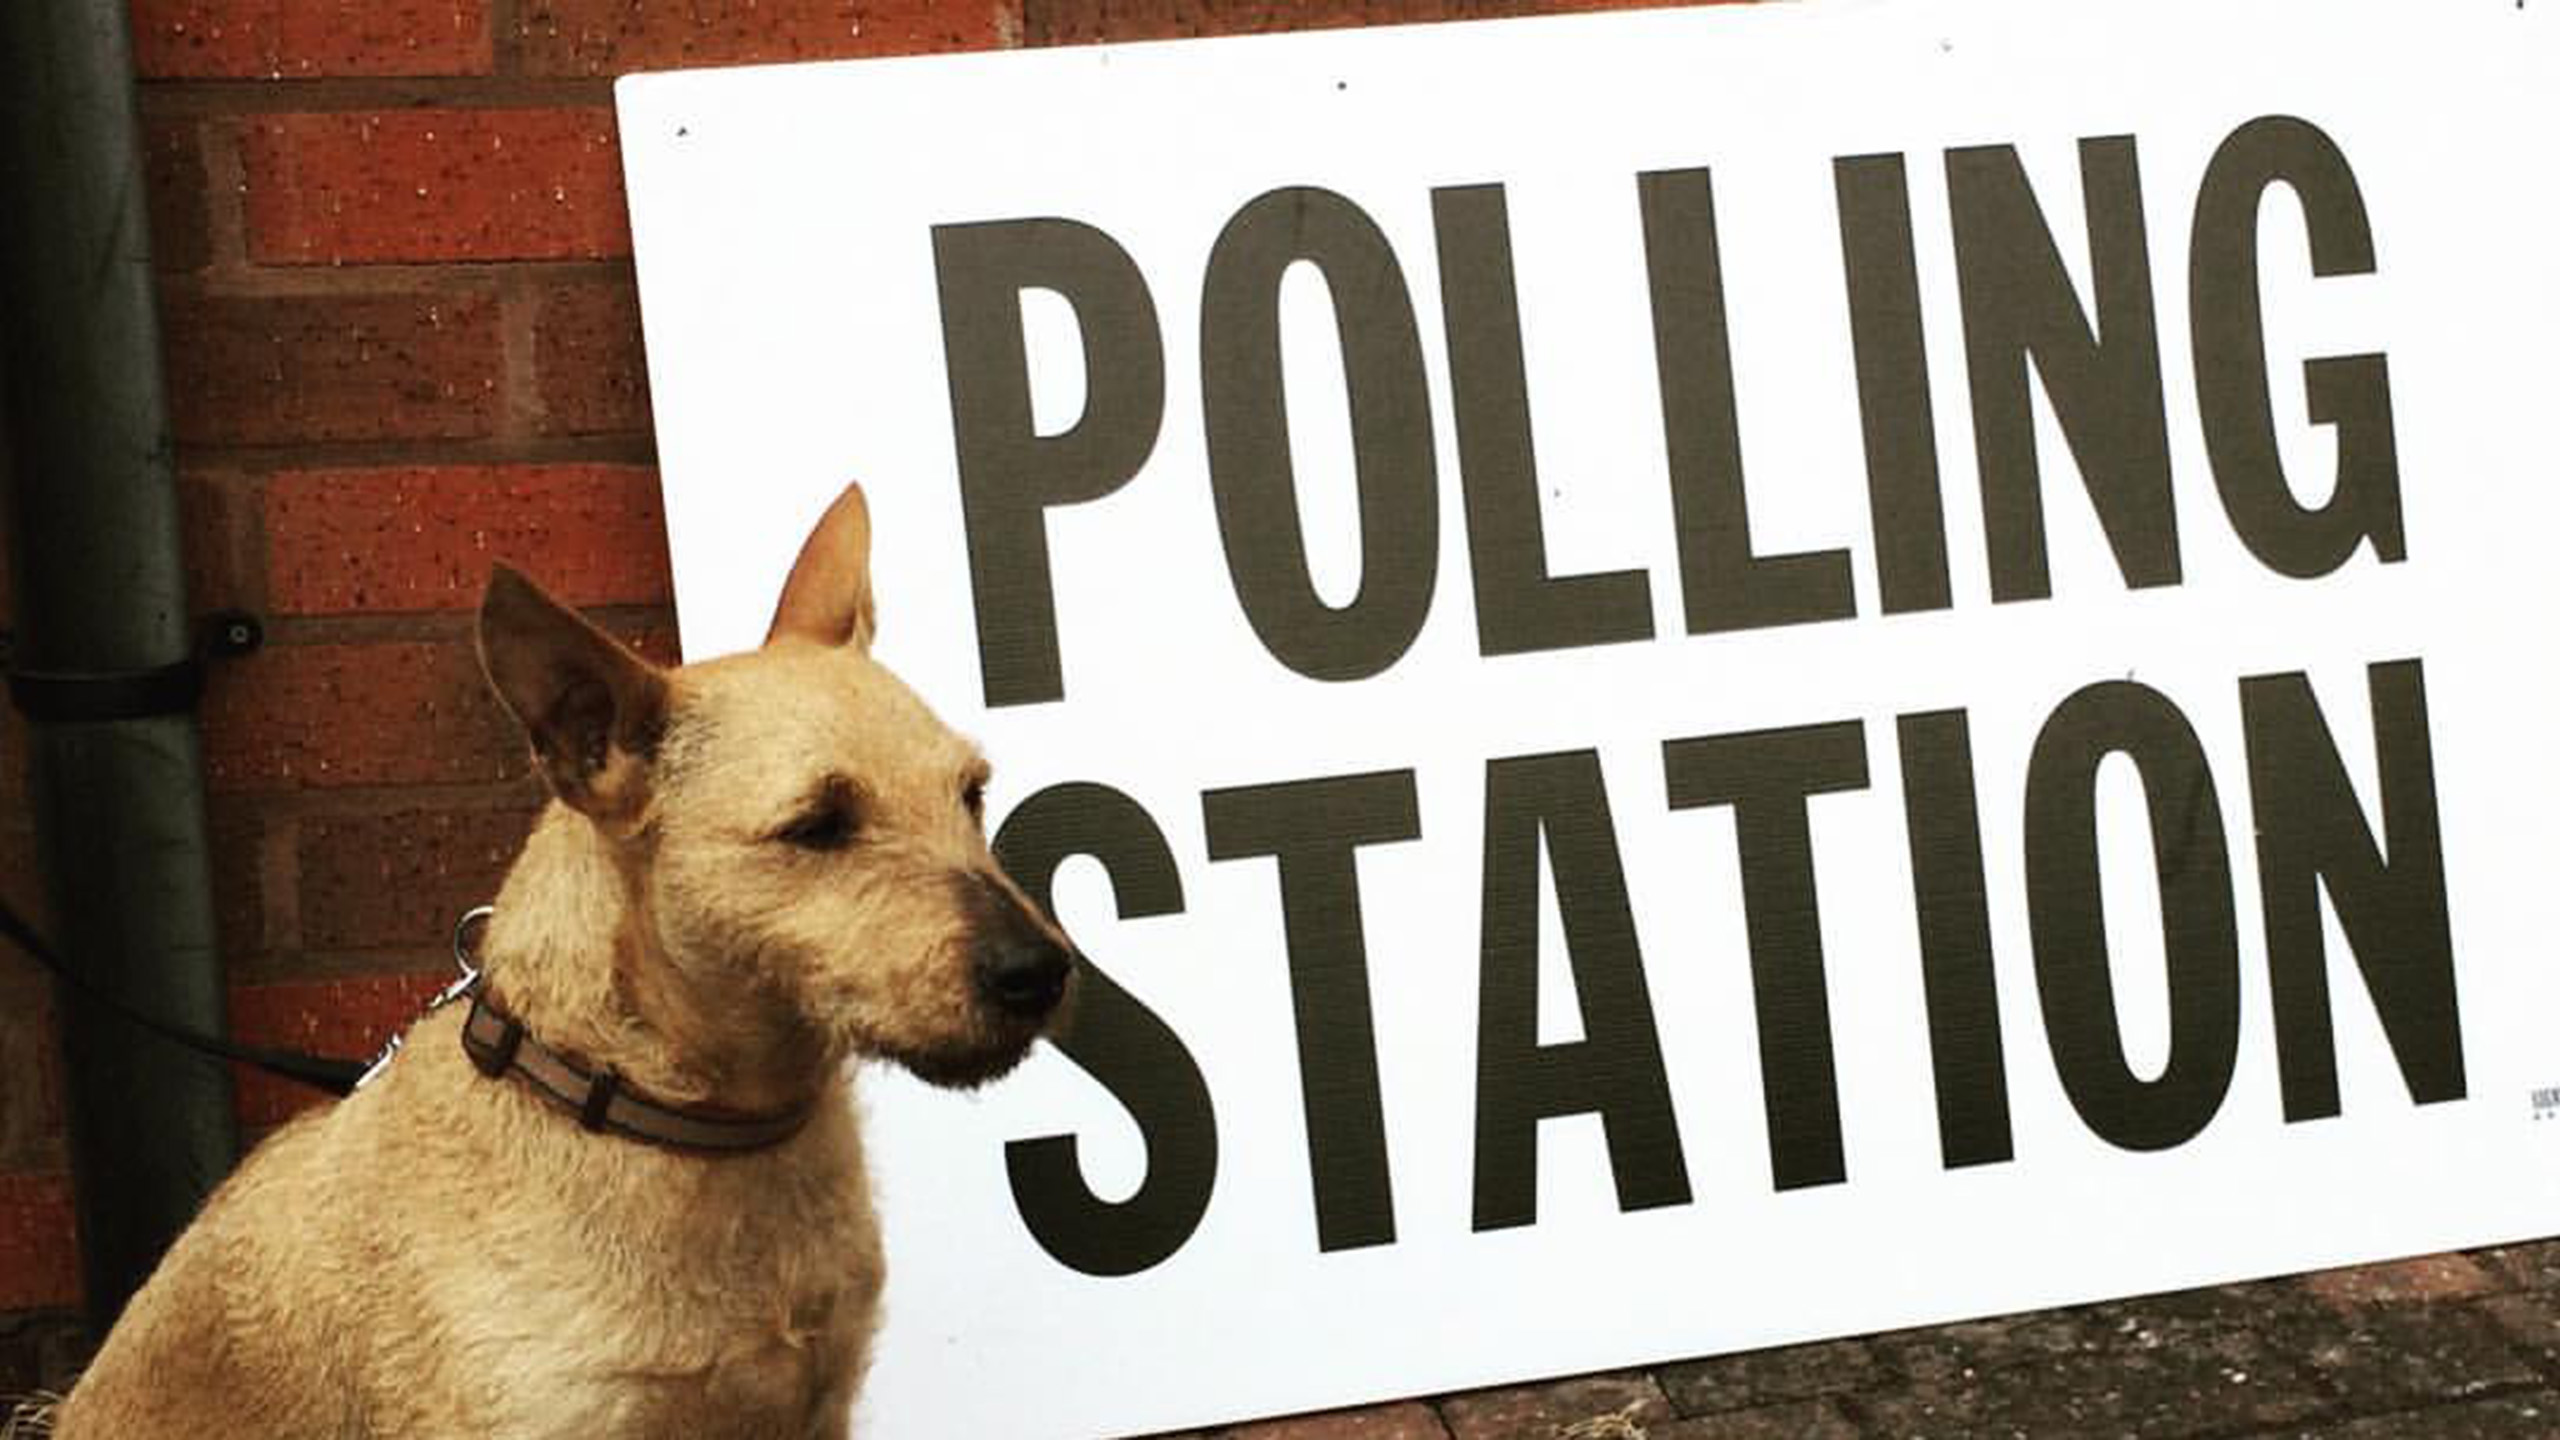 Via Attribution 2.0 Generic (CC BY 2.0) / https://creativecommons.org/licenses/by/2.0/ - https://en.wikipedia.org/wiki/File:Pip_the_dog_at_a_polling_station.jpg#/media/File:Pip_the_dog_at_a_polling_station.jpg